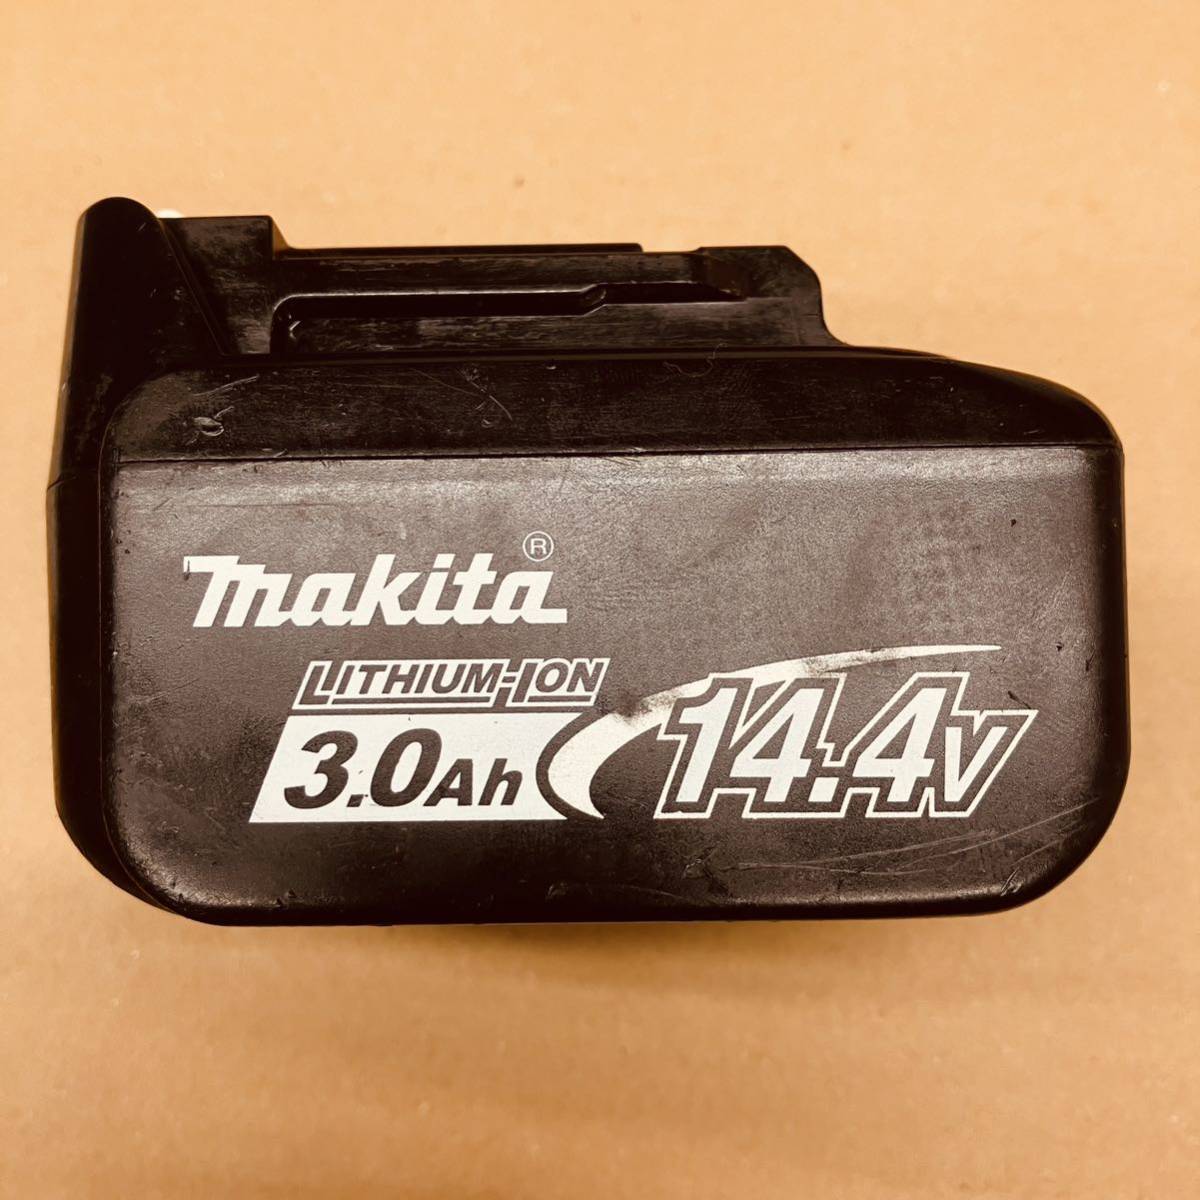 352 used genuine products Makita rechargeable battery 14.4V 3.0Ah BL1430 lithium ion battery makita